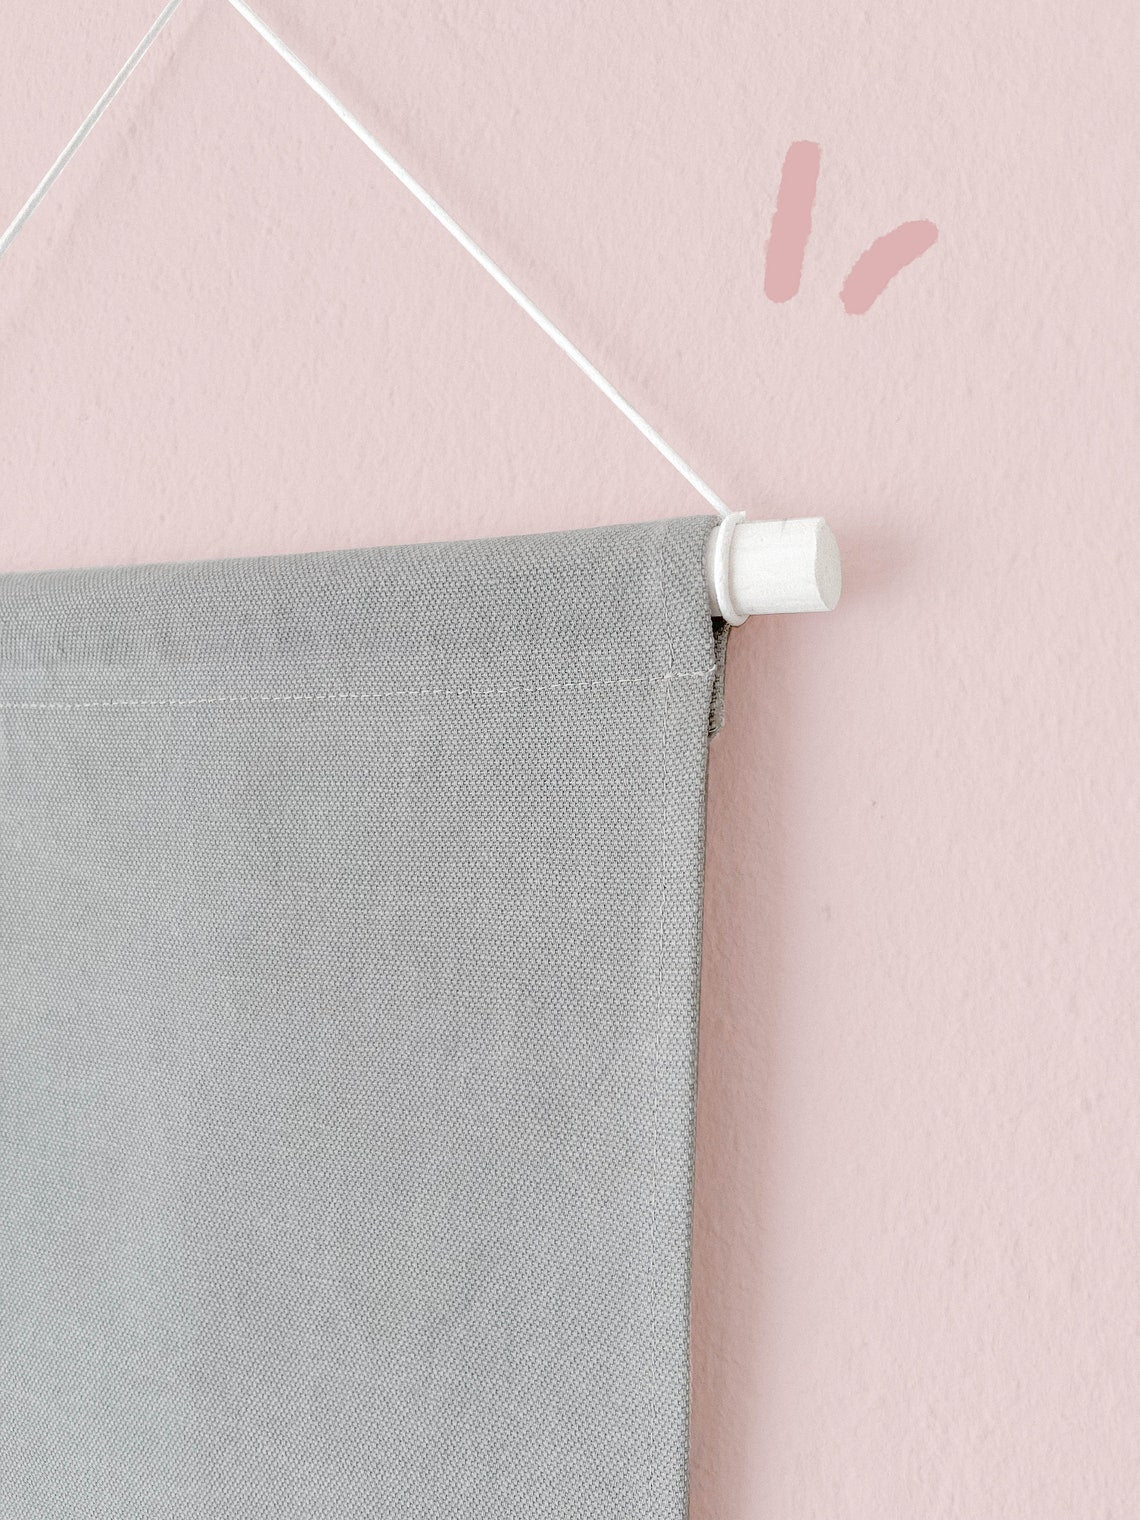 Cute Cotton Pin Banner | XL 25cm x 40cm | Handmade in Germany | Grey Canvas Fabric | Classic Pin Display